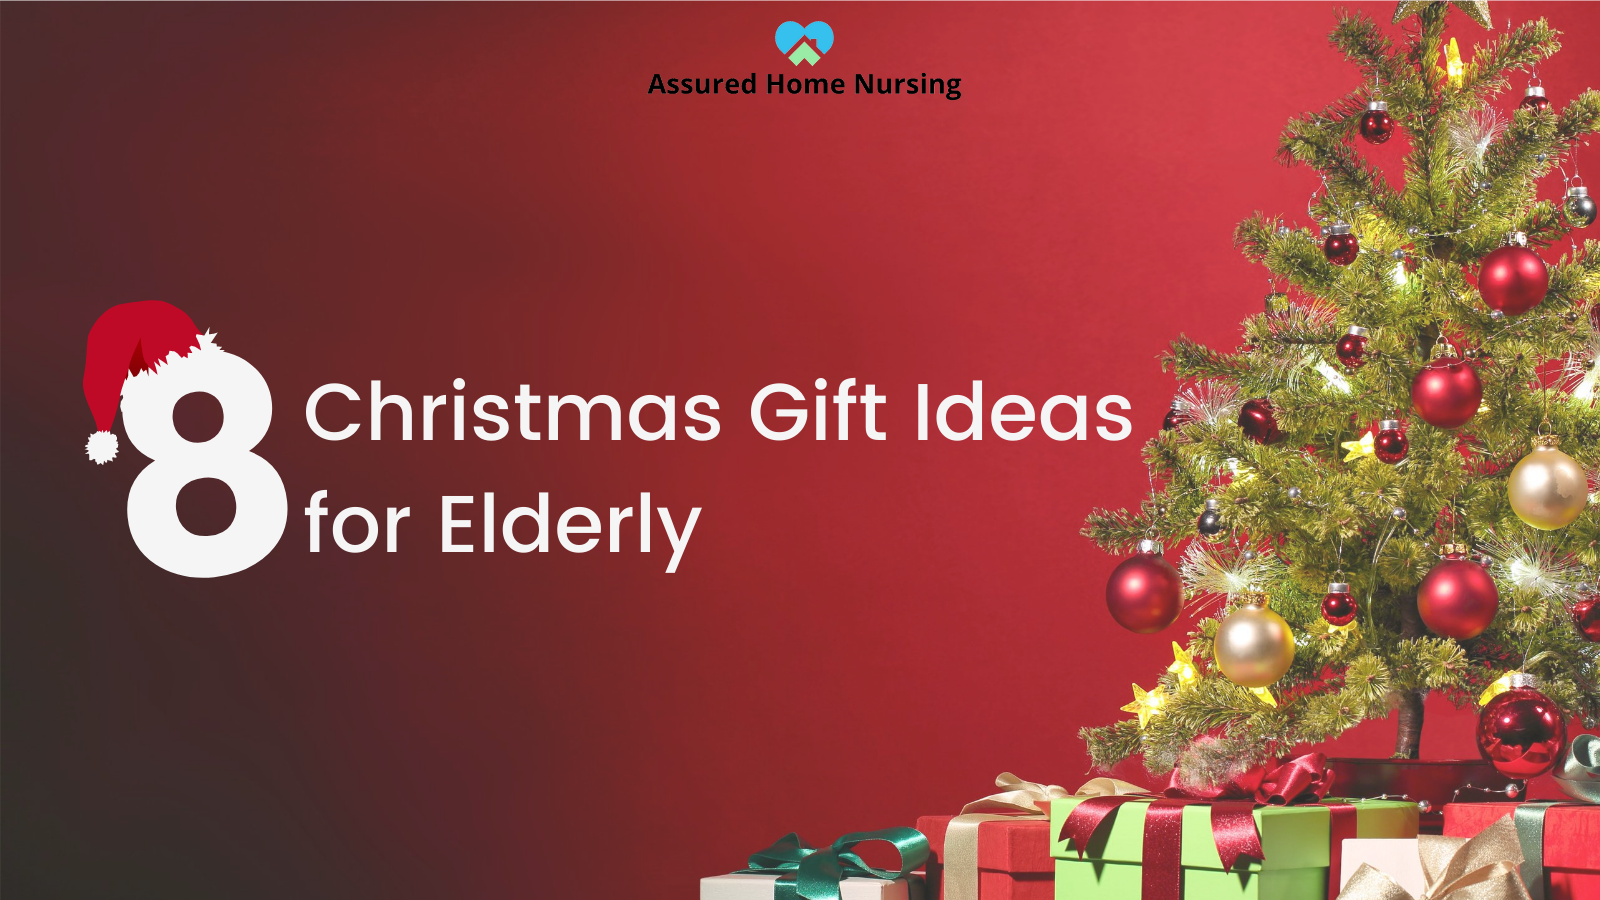 4 Great Christmas Gifts for Seniors